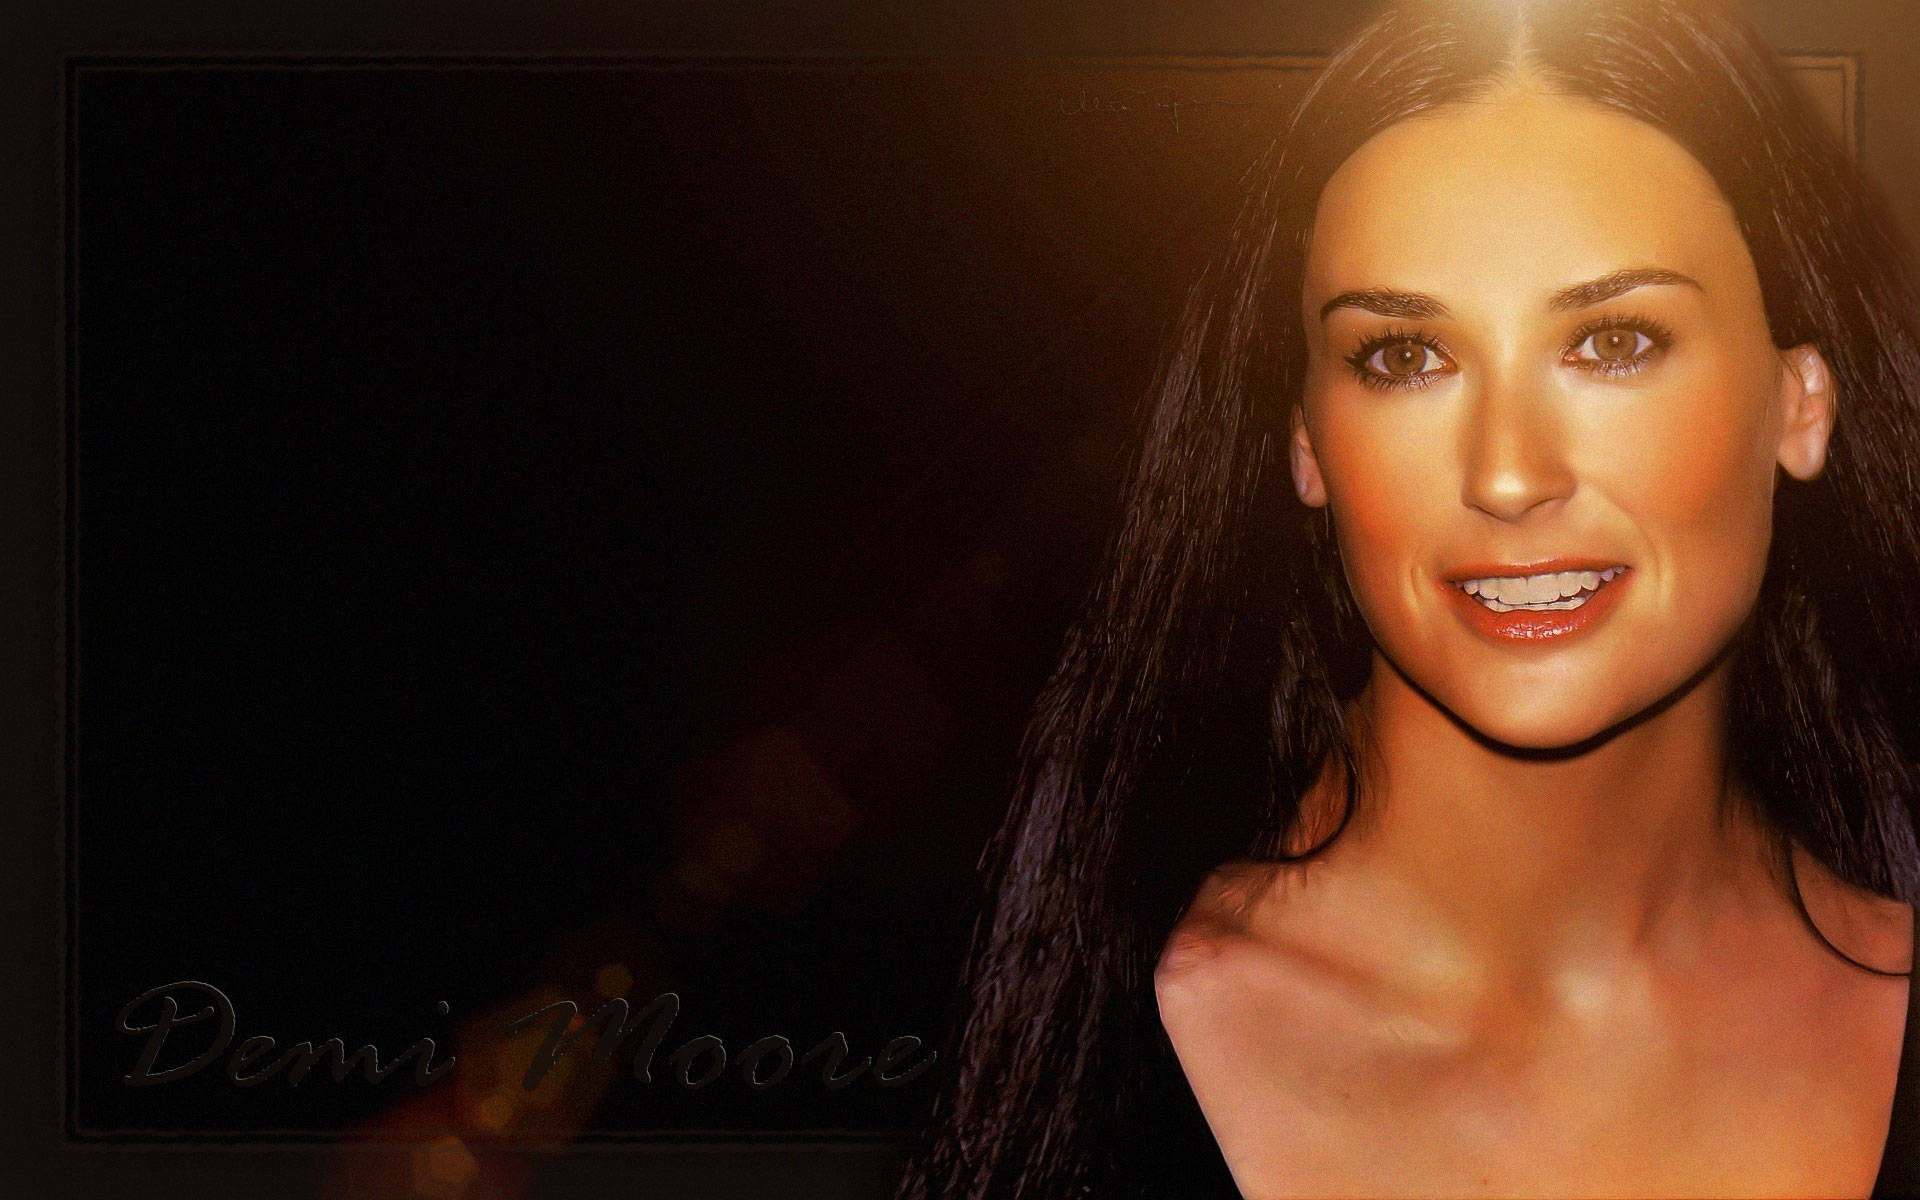 Captivating Demi Moore Close Up Smile